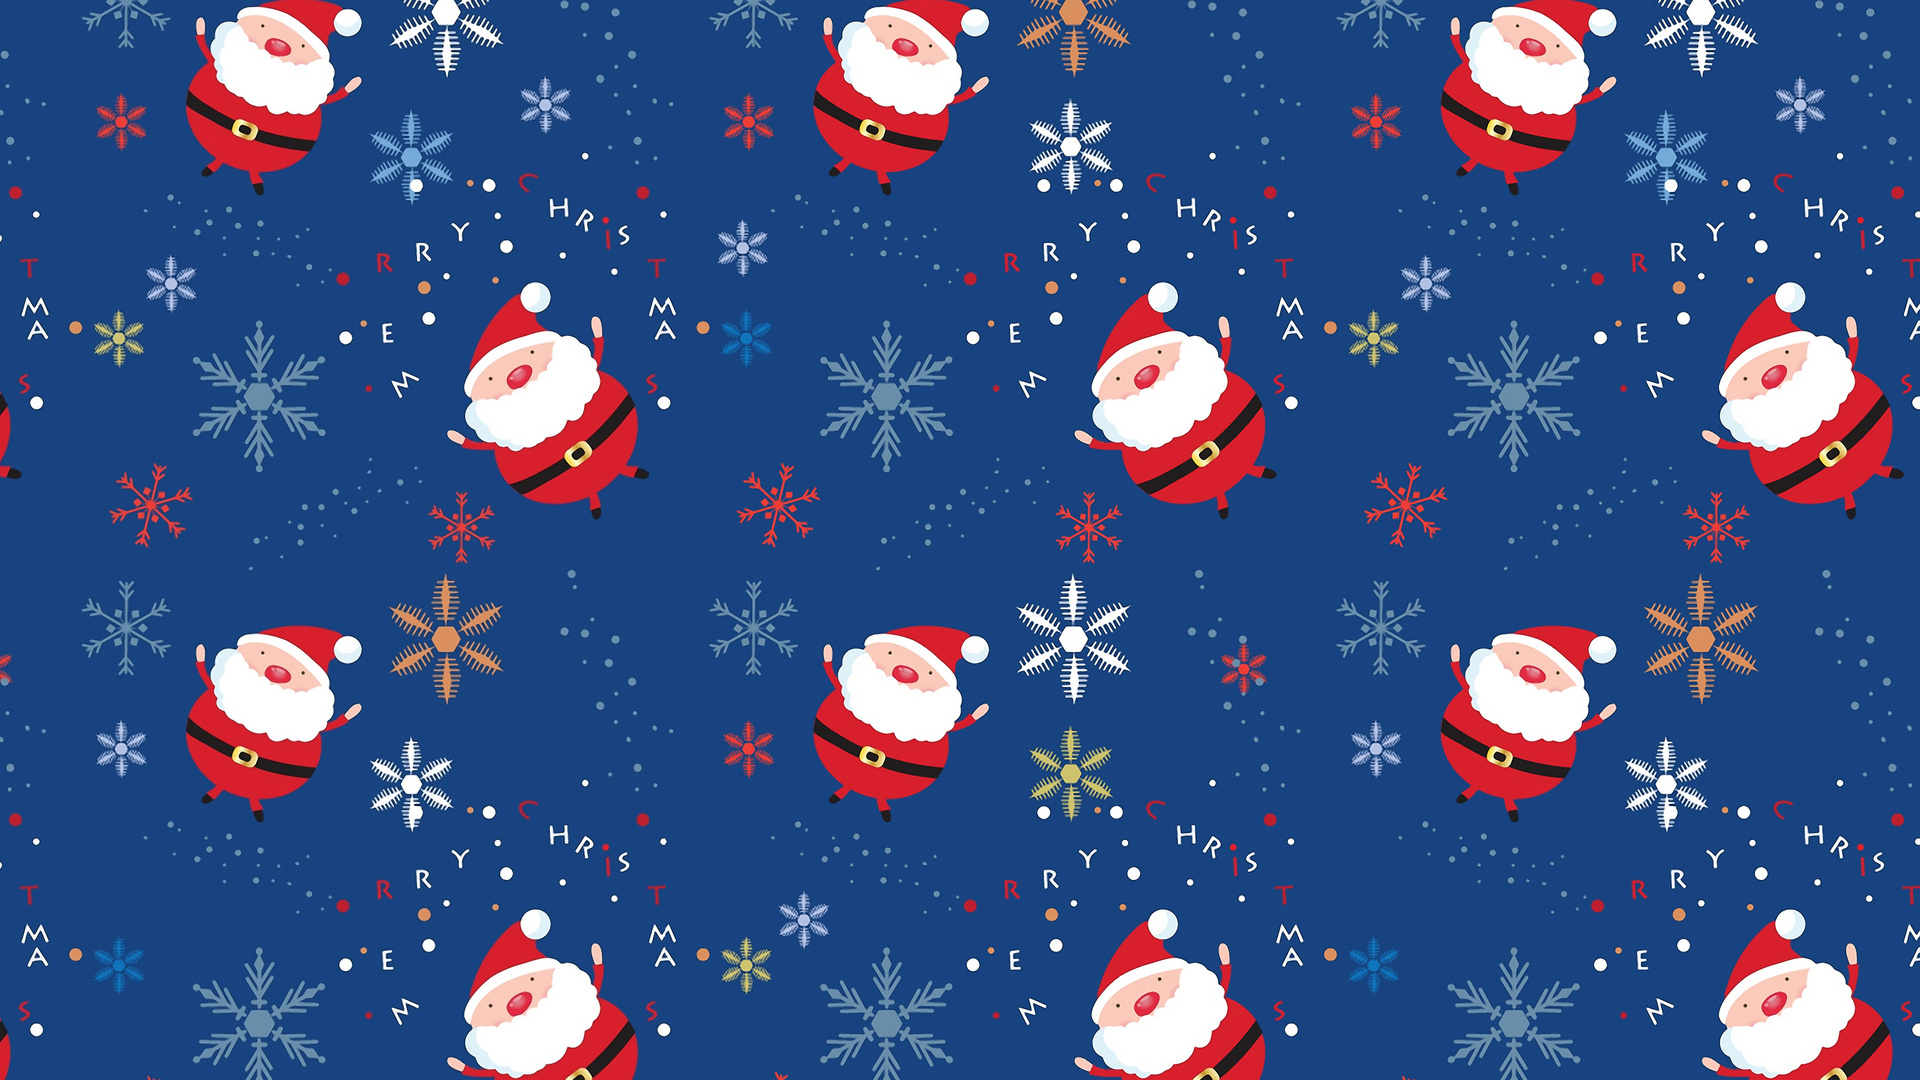 Cute Christmas Backgrounds Download 1920x1080